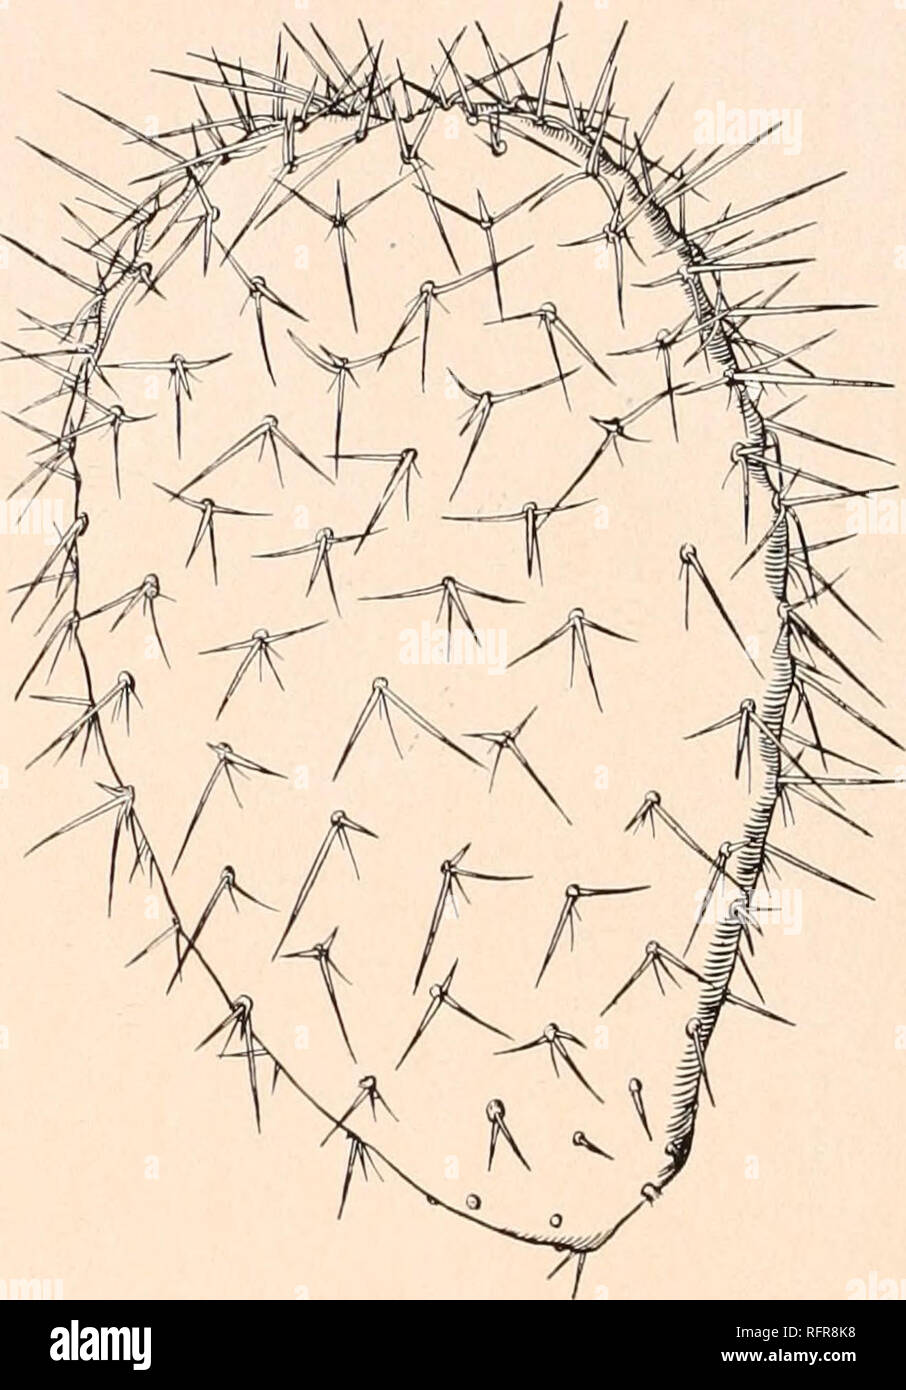 . Carnegie Institution of Washington publication. 184 THE CACTACEAE. 4 to 6 (in the original description 8 to 10), somewhat spreading or appressed, i to 2 cm. long; glochids few, brownish; areoles small, 1.5 cm. apart; leaves small, brownish; flowers red; fruit globular, yellowish, its areoles filled with long, weak glochids; umbilicus broad, only slightly depressed. Type locality: In Mexico. Distribution: Oaxaca, Mexico. This species is very near Opuntia streptacantha, and in many cases it is difficult to separate them. It is also near O. pilifera, but the areoles are not so hairy. Weber, who Stock Photo